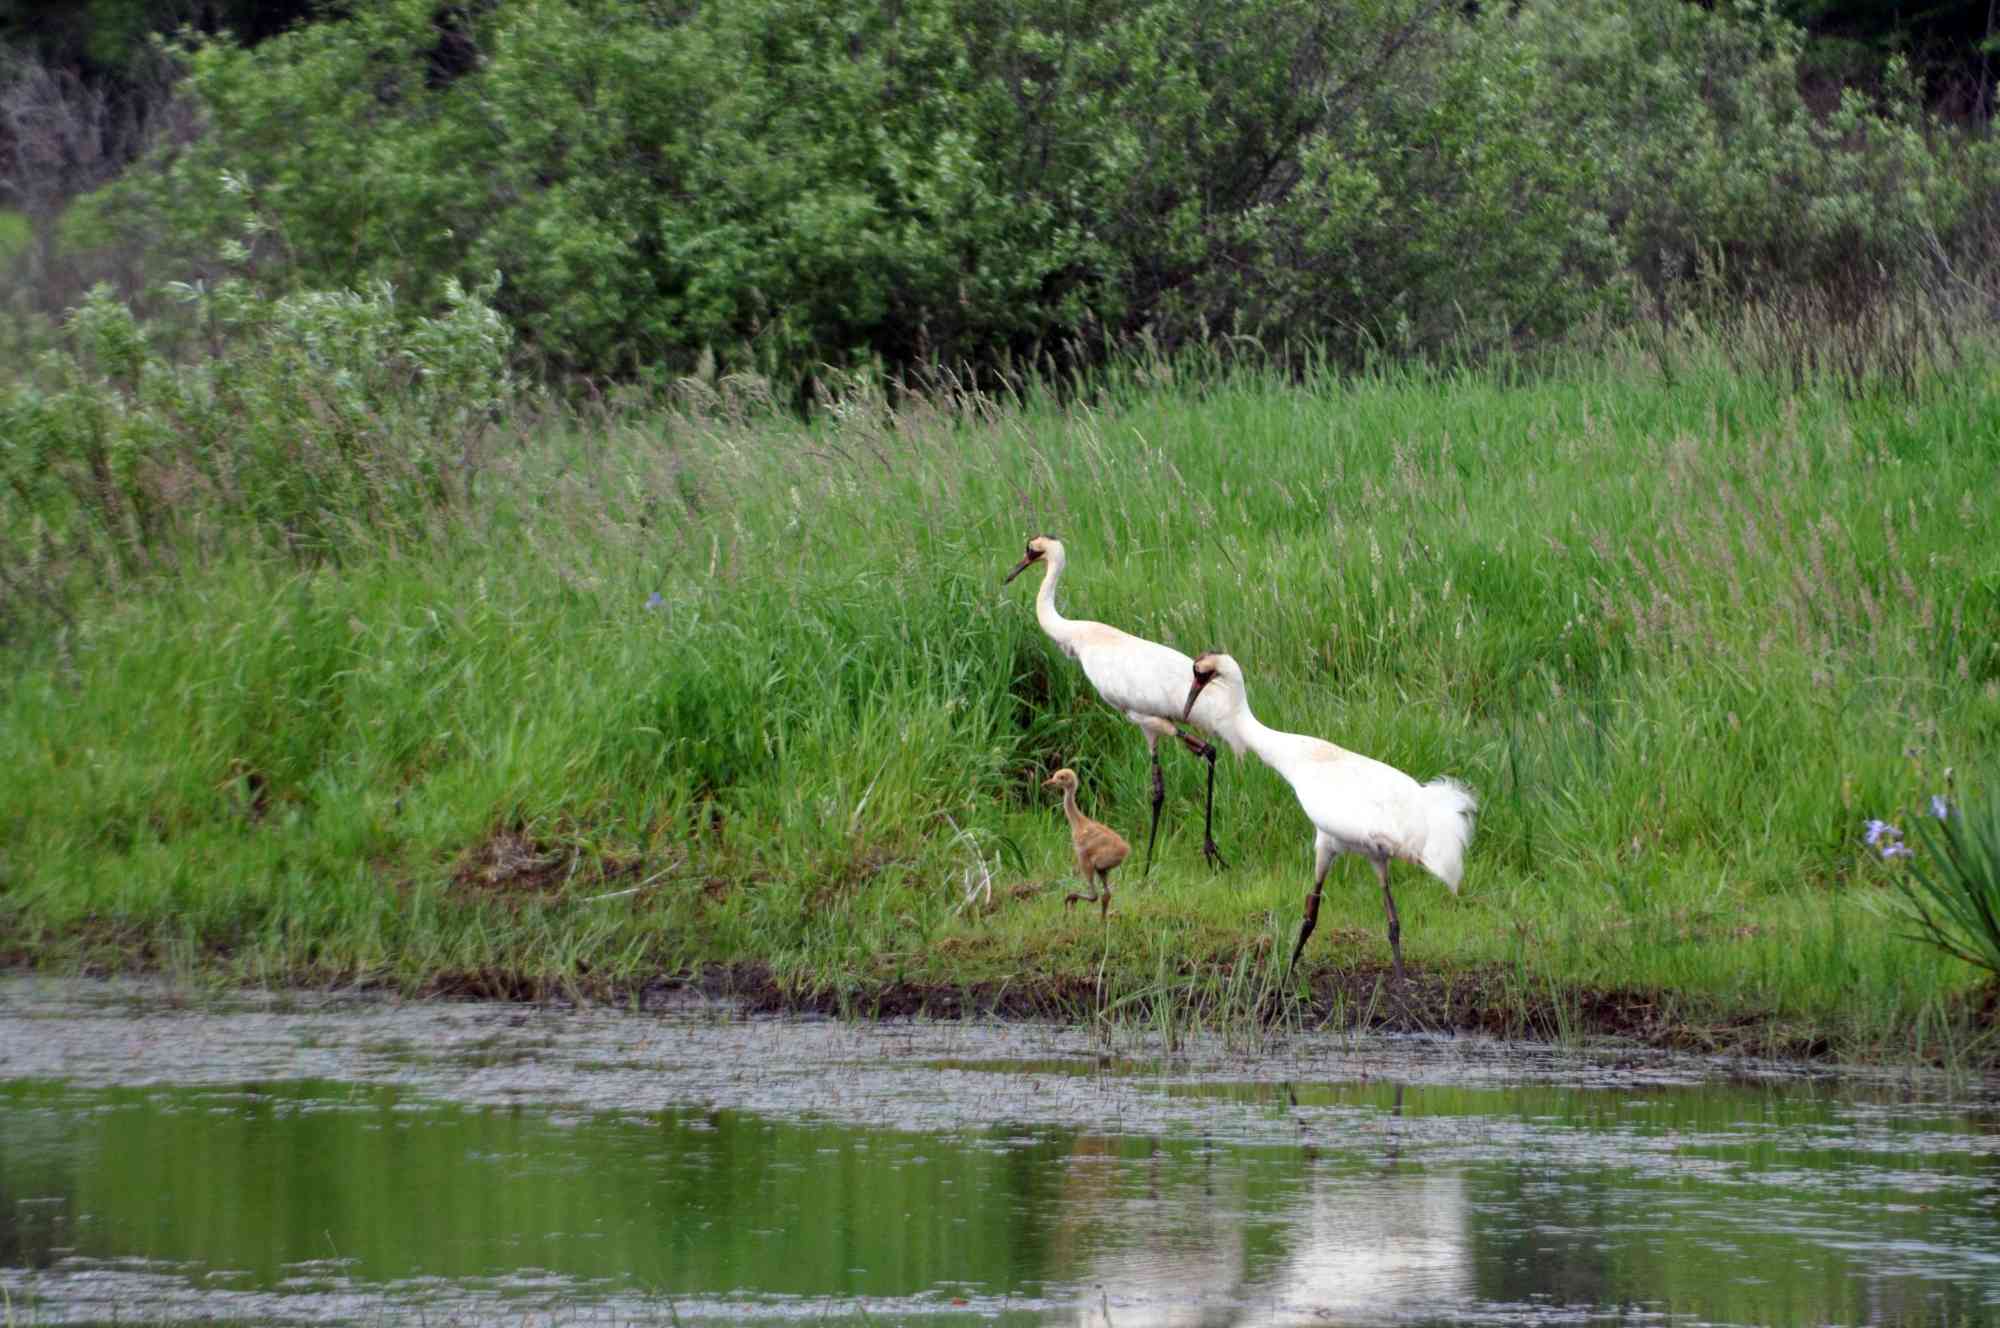 Whooping crane family